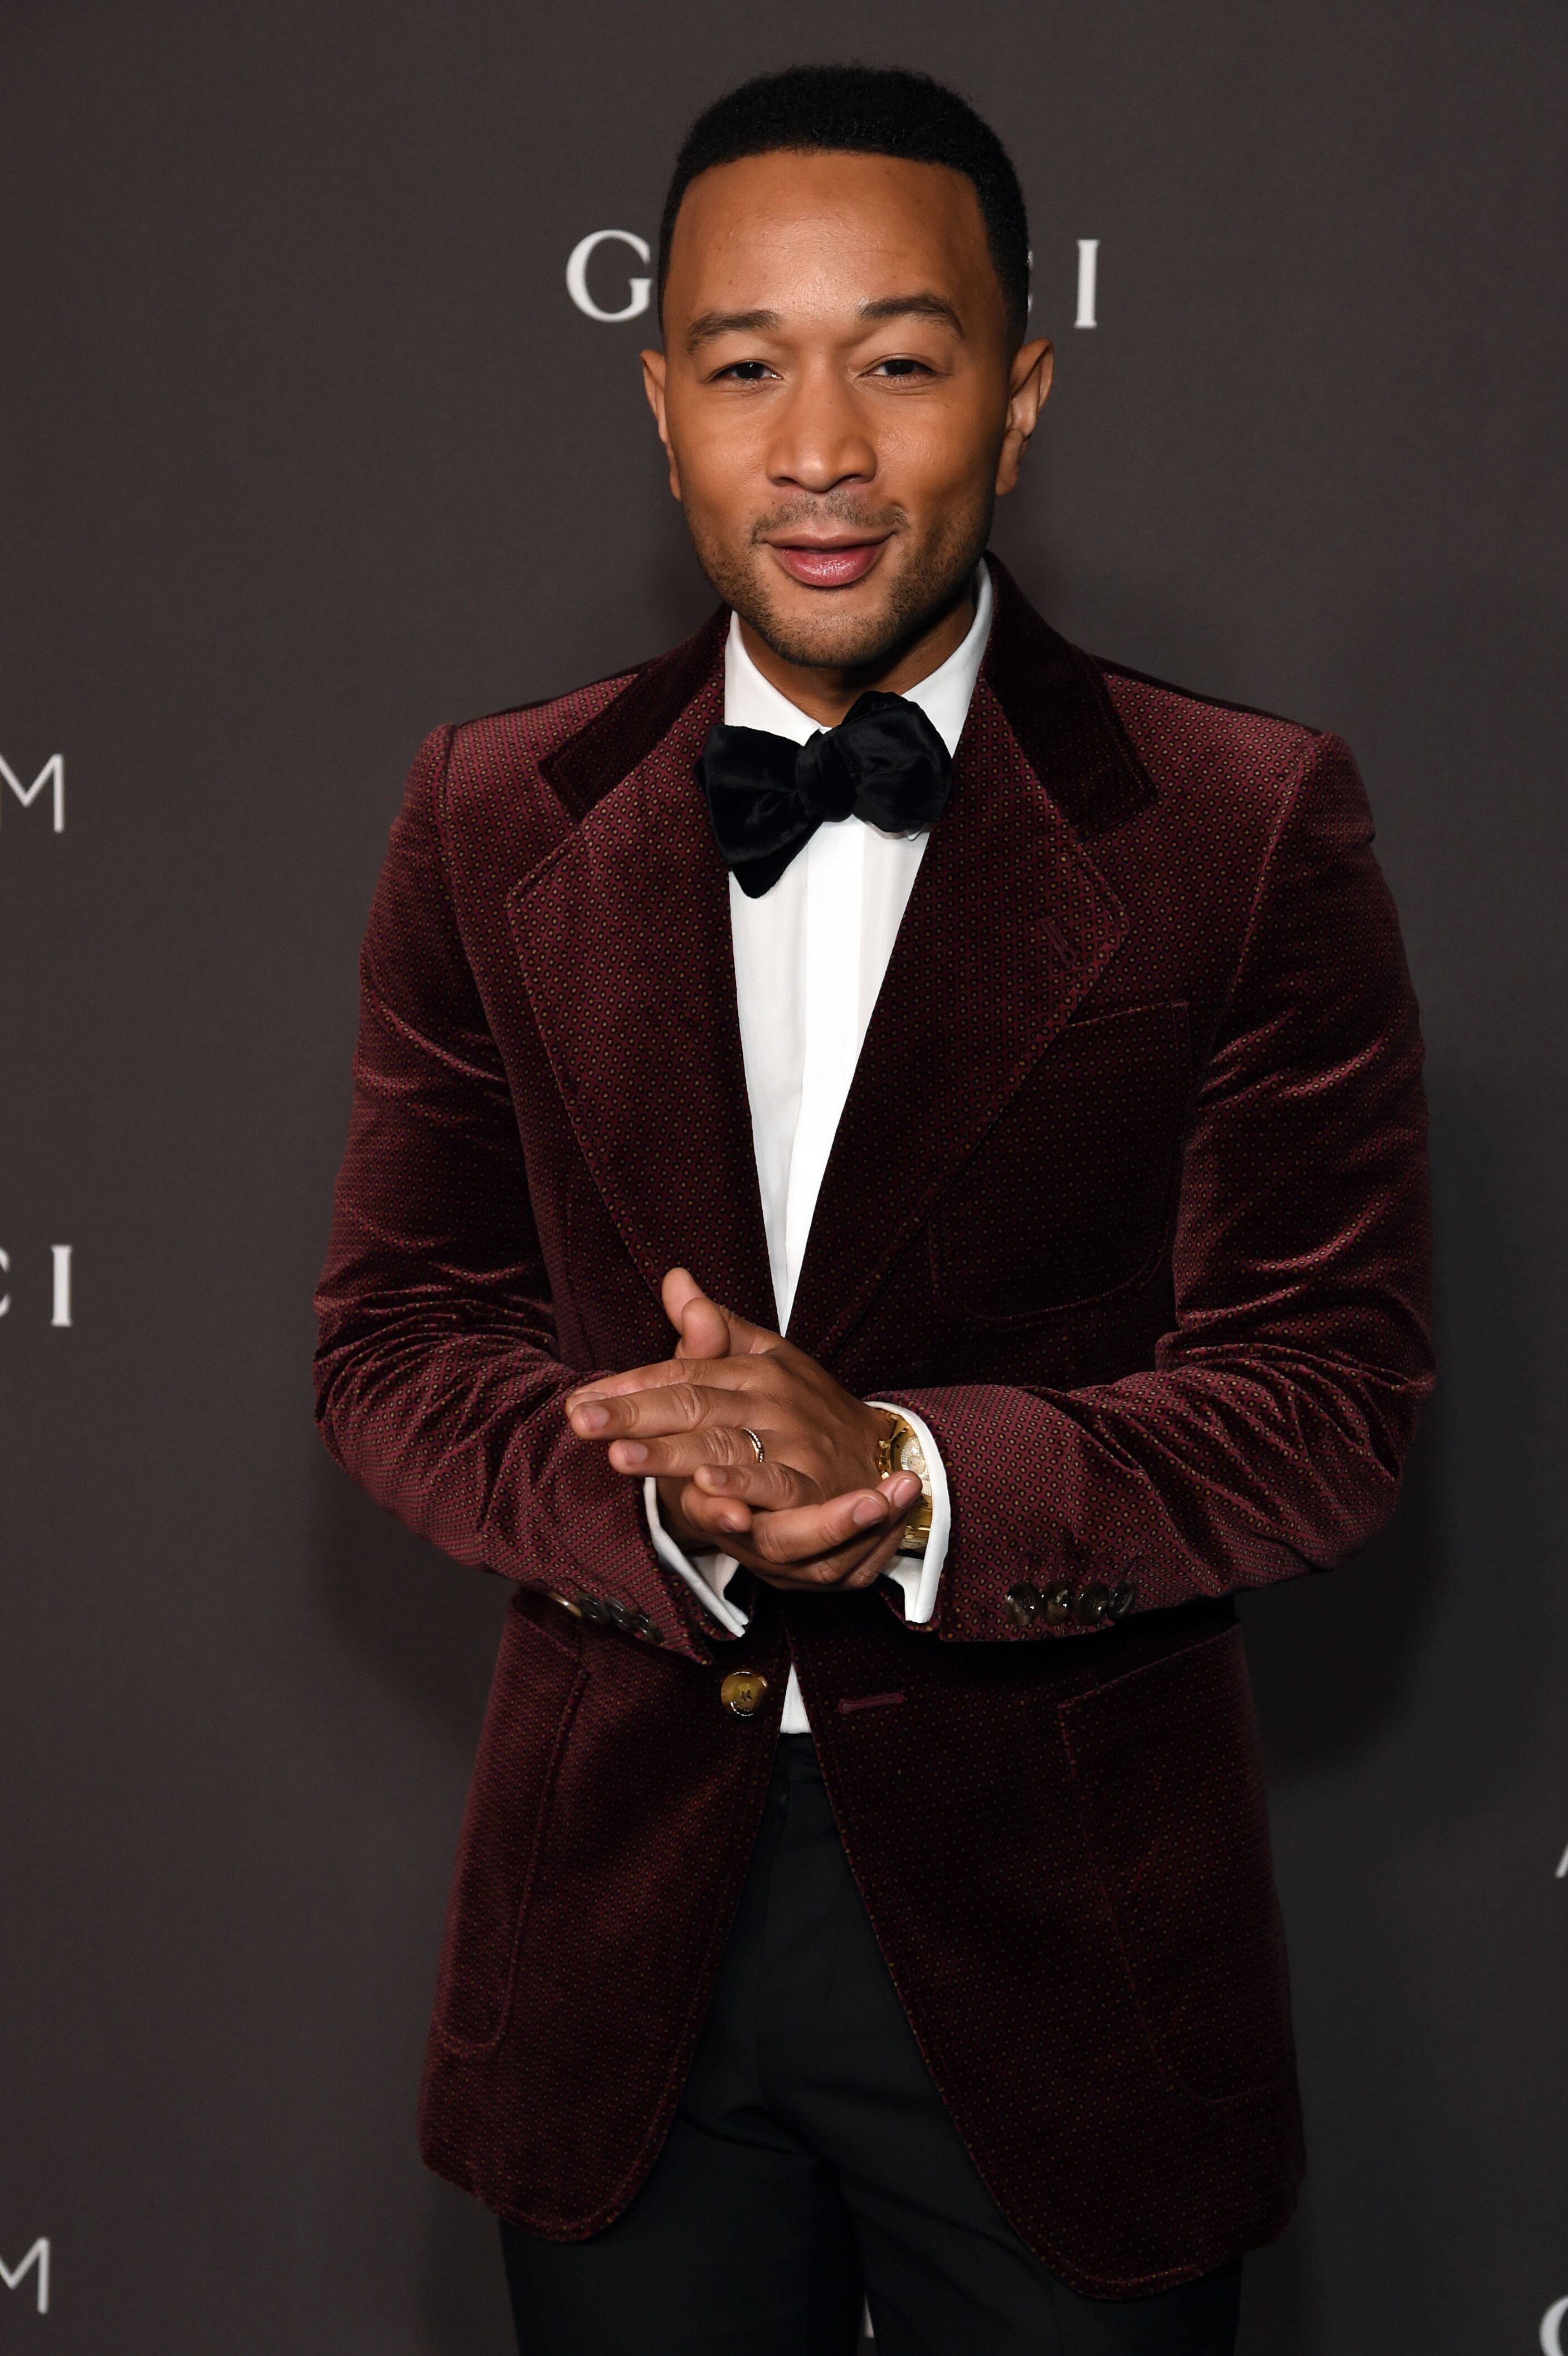 John Legend at the LACMA Art + Film Gala Presented on November 02, 2019, in Los Angeles, California | Photo: Michael Kovac/Getty Images